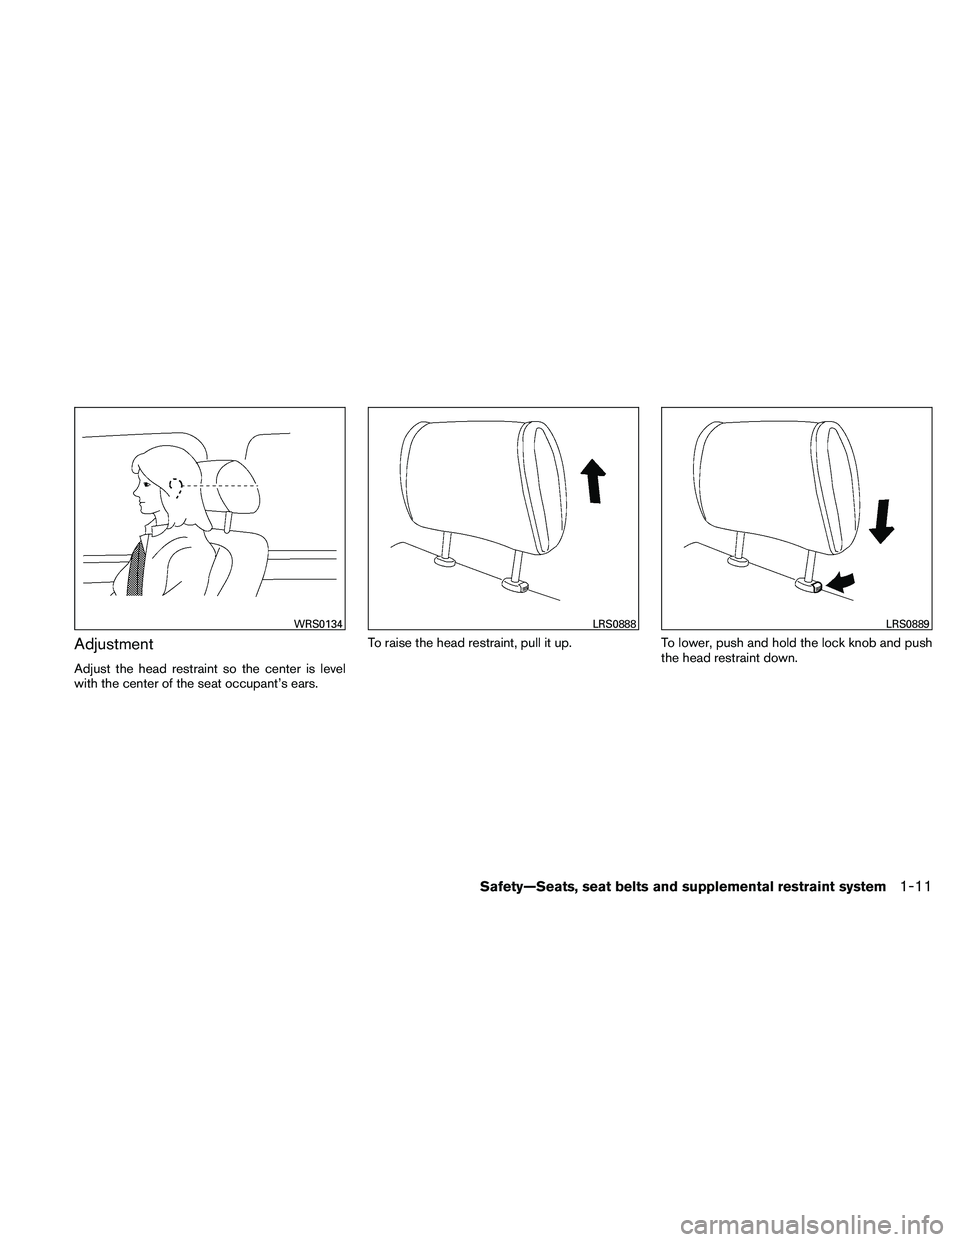 NISSAN ALTIMA 2011  Owners Manual Adjustment
Adjust the head restraint so the center is level
with the center of the seat occupant’s ears.To raise the head restraint, pull it up.
To lower, push and hold the lock knob and push
the he